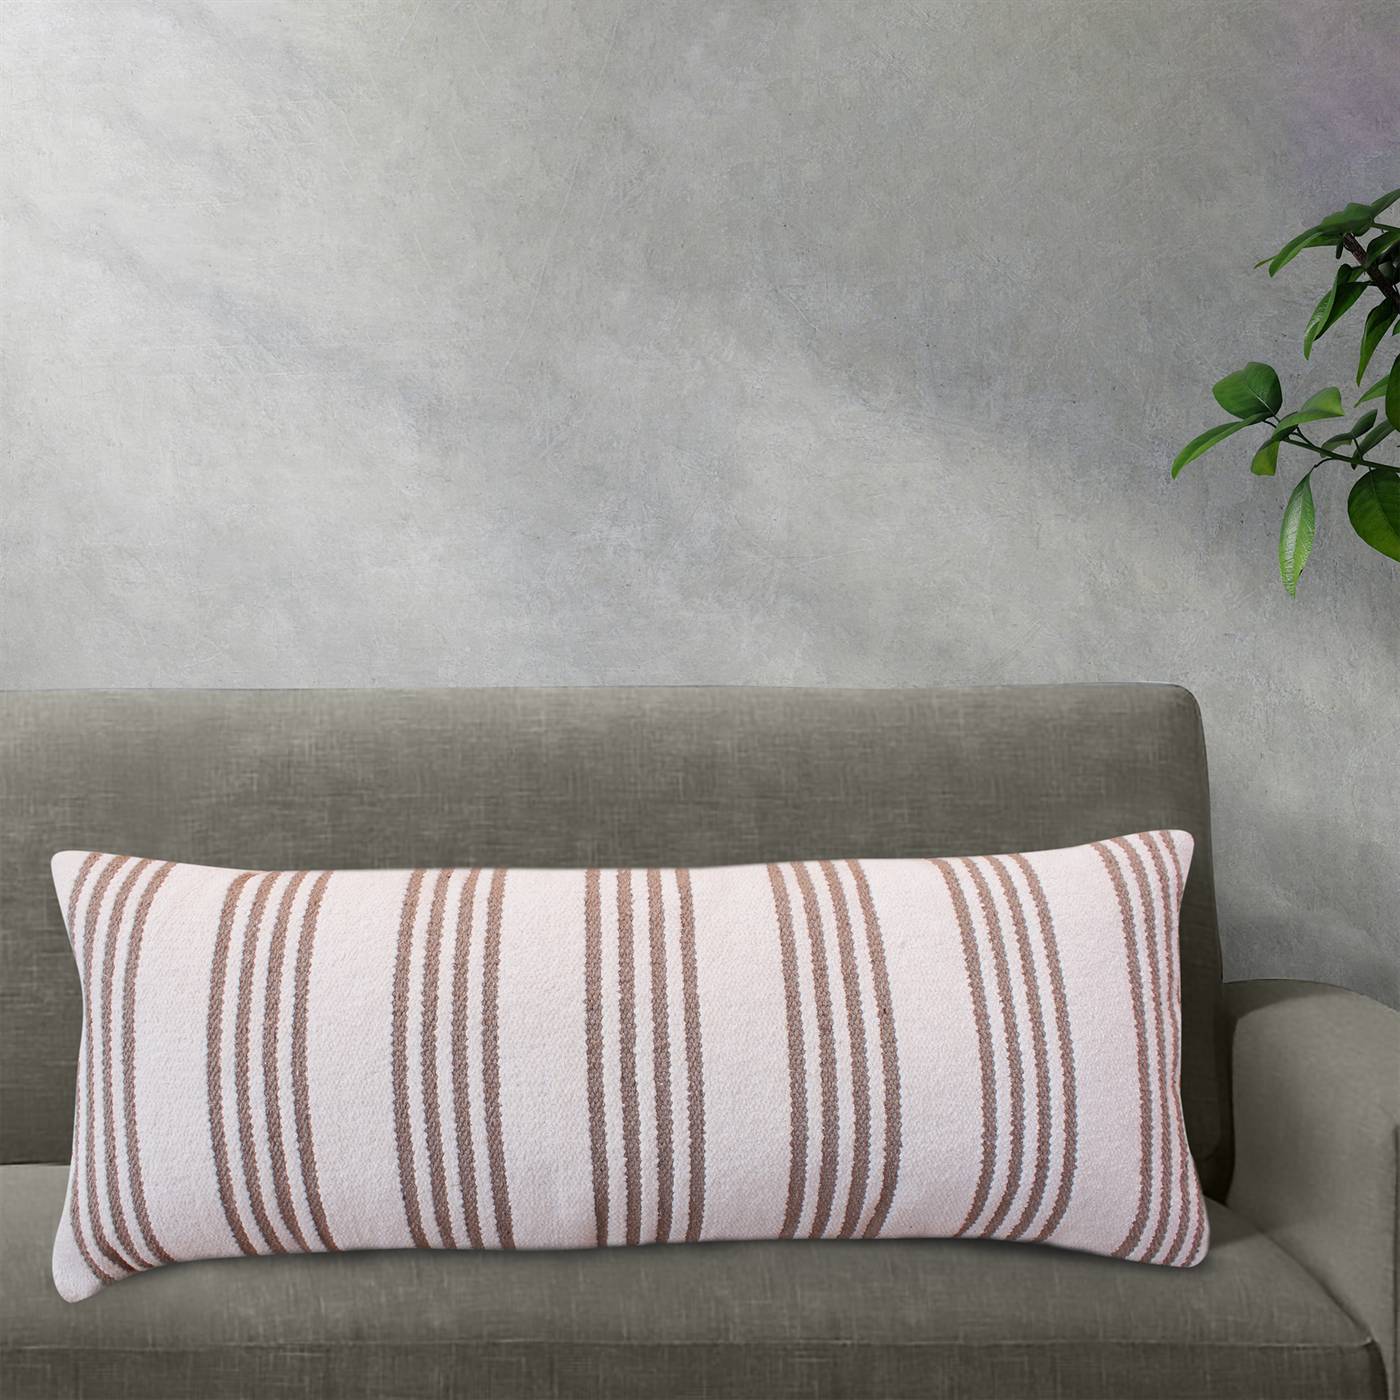 Striped Lumber Cushion, 36x91 cm, Natural White, Beige, Cotton, Chenille, Hand Woven, Pitloom, Flat Weave